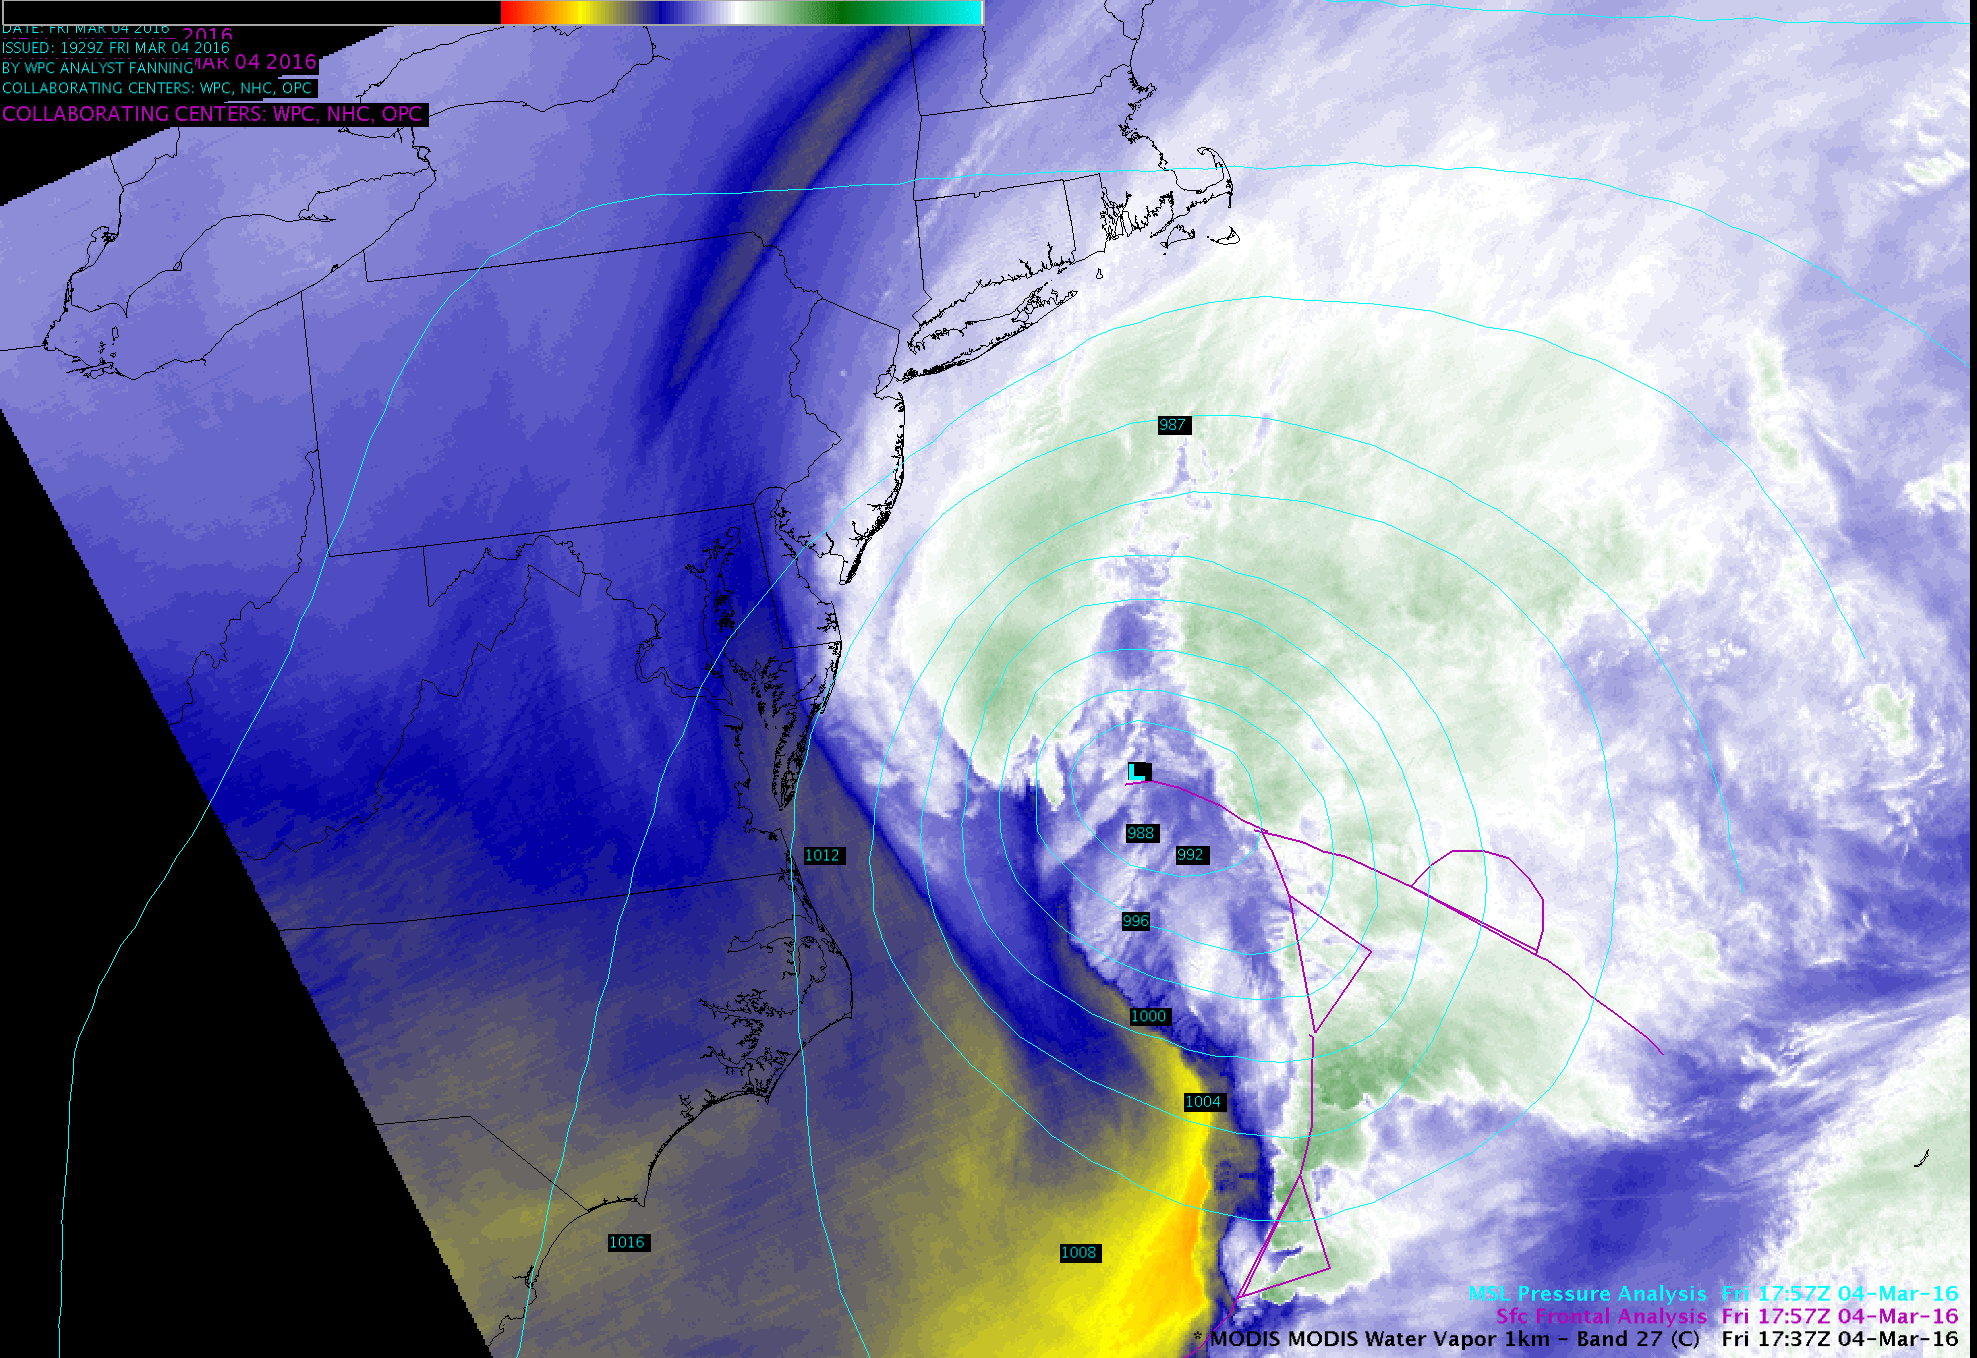 Aqua MODIS Water Vapor (6.7 µm), Infrared (11.0 µm), and Visible (0.65 µm) images [click to enlarge]